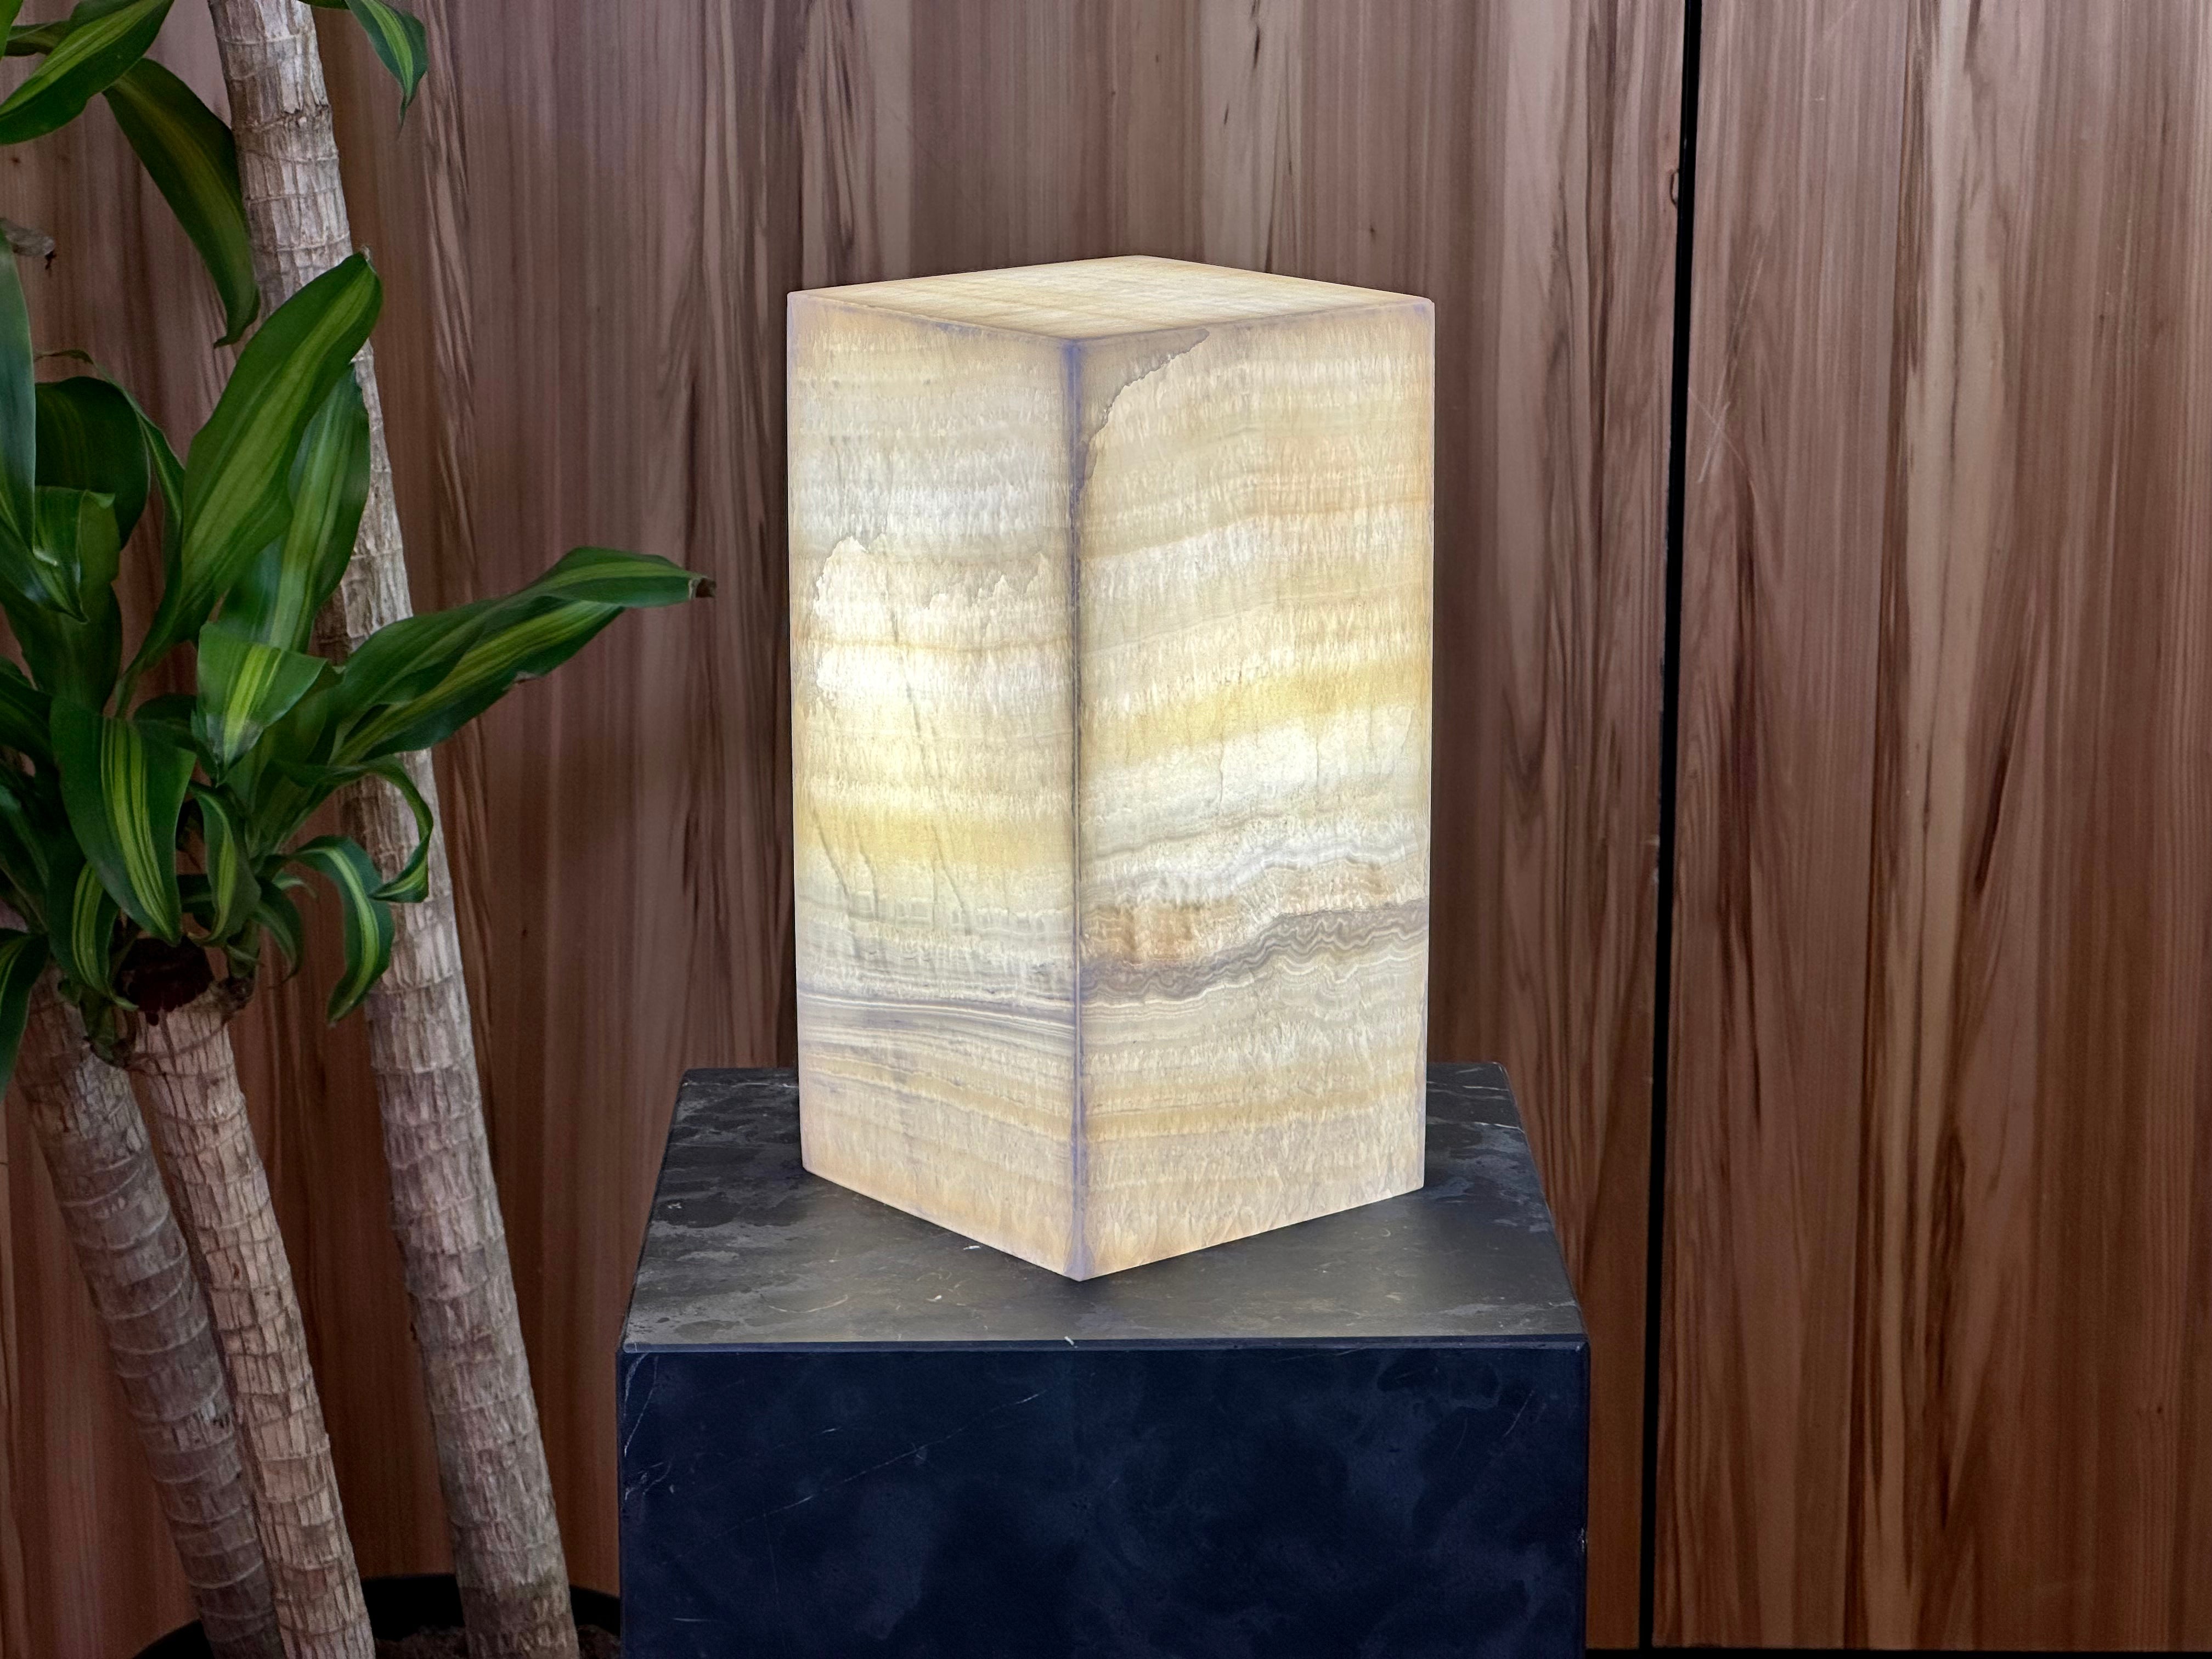 Designer Stone Lamps for Home Decor - Elevate your interior decor with handcrafted onyx lamps perfect for bedroom, living room or office.